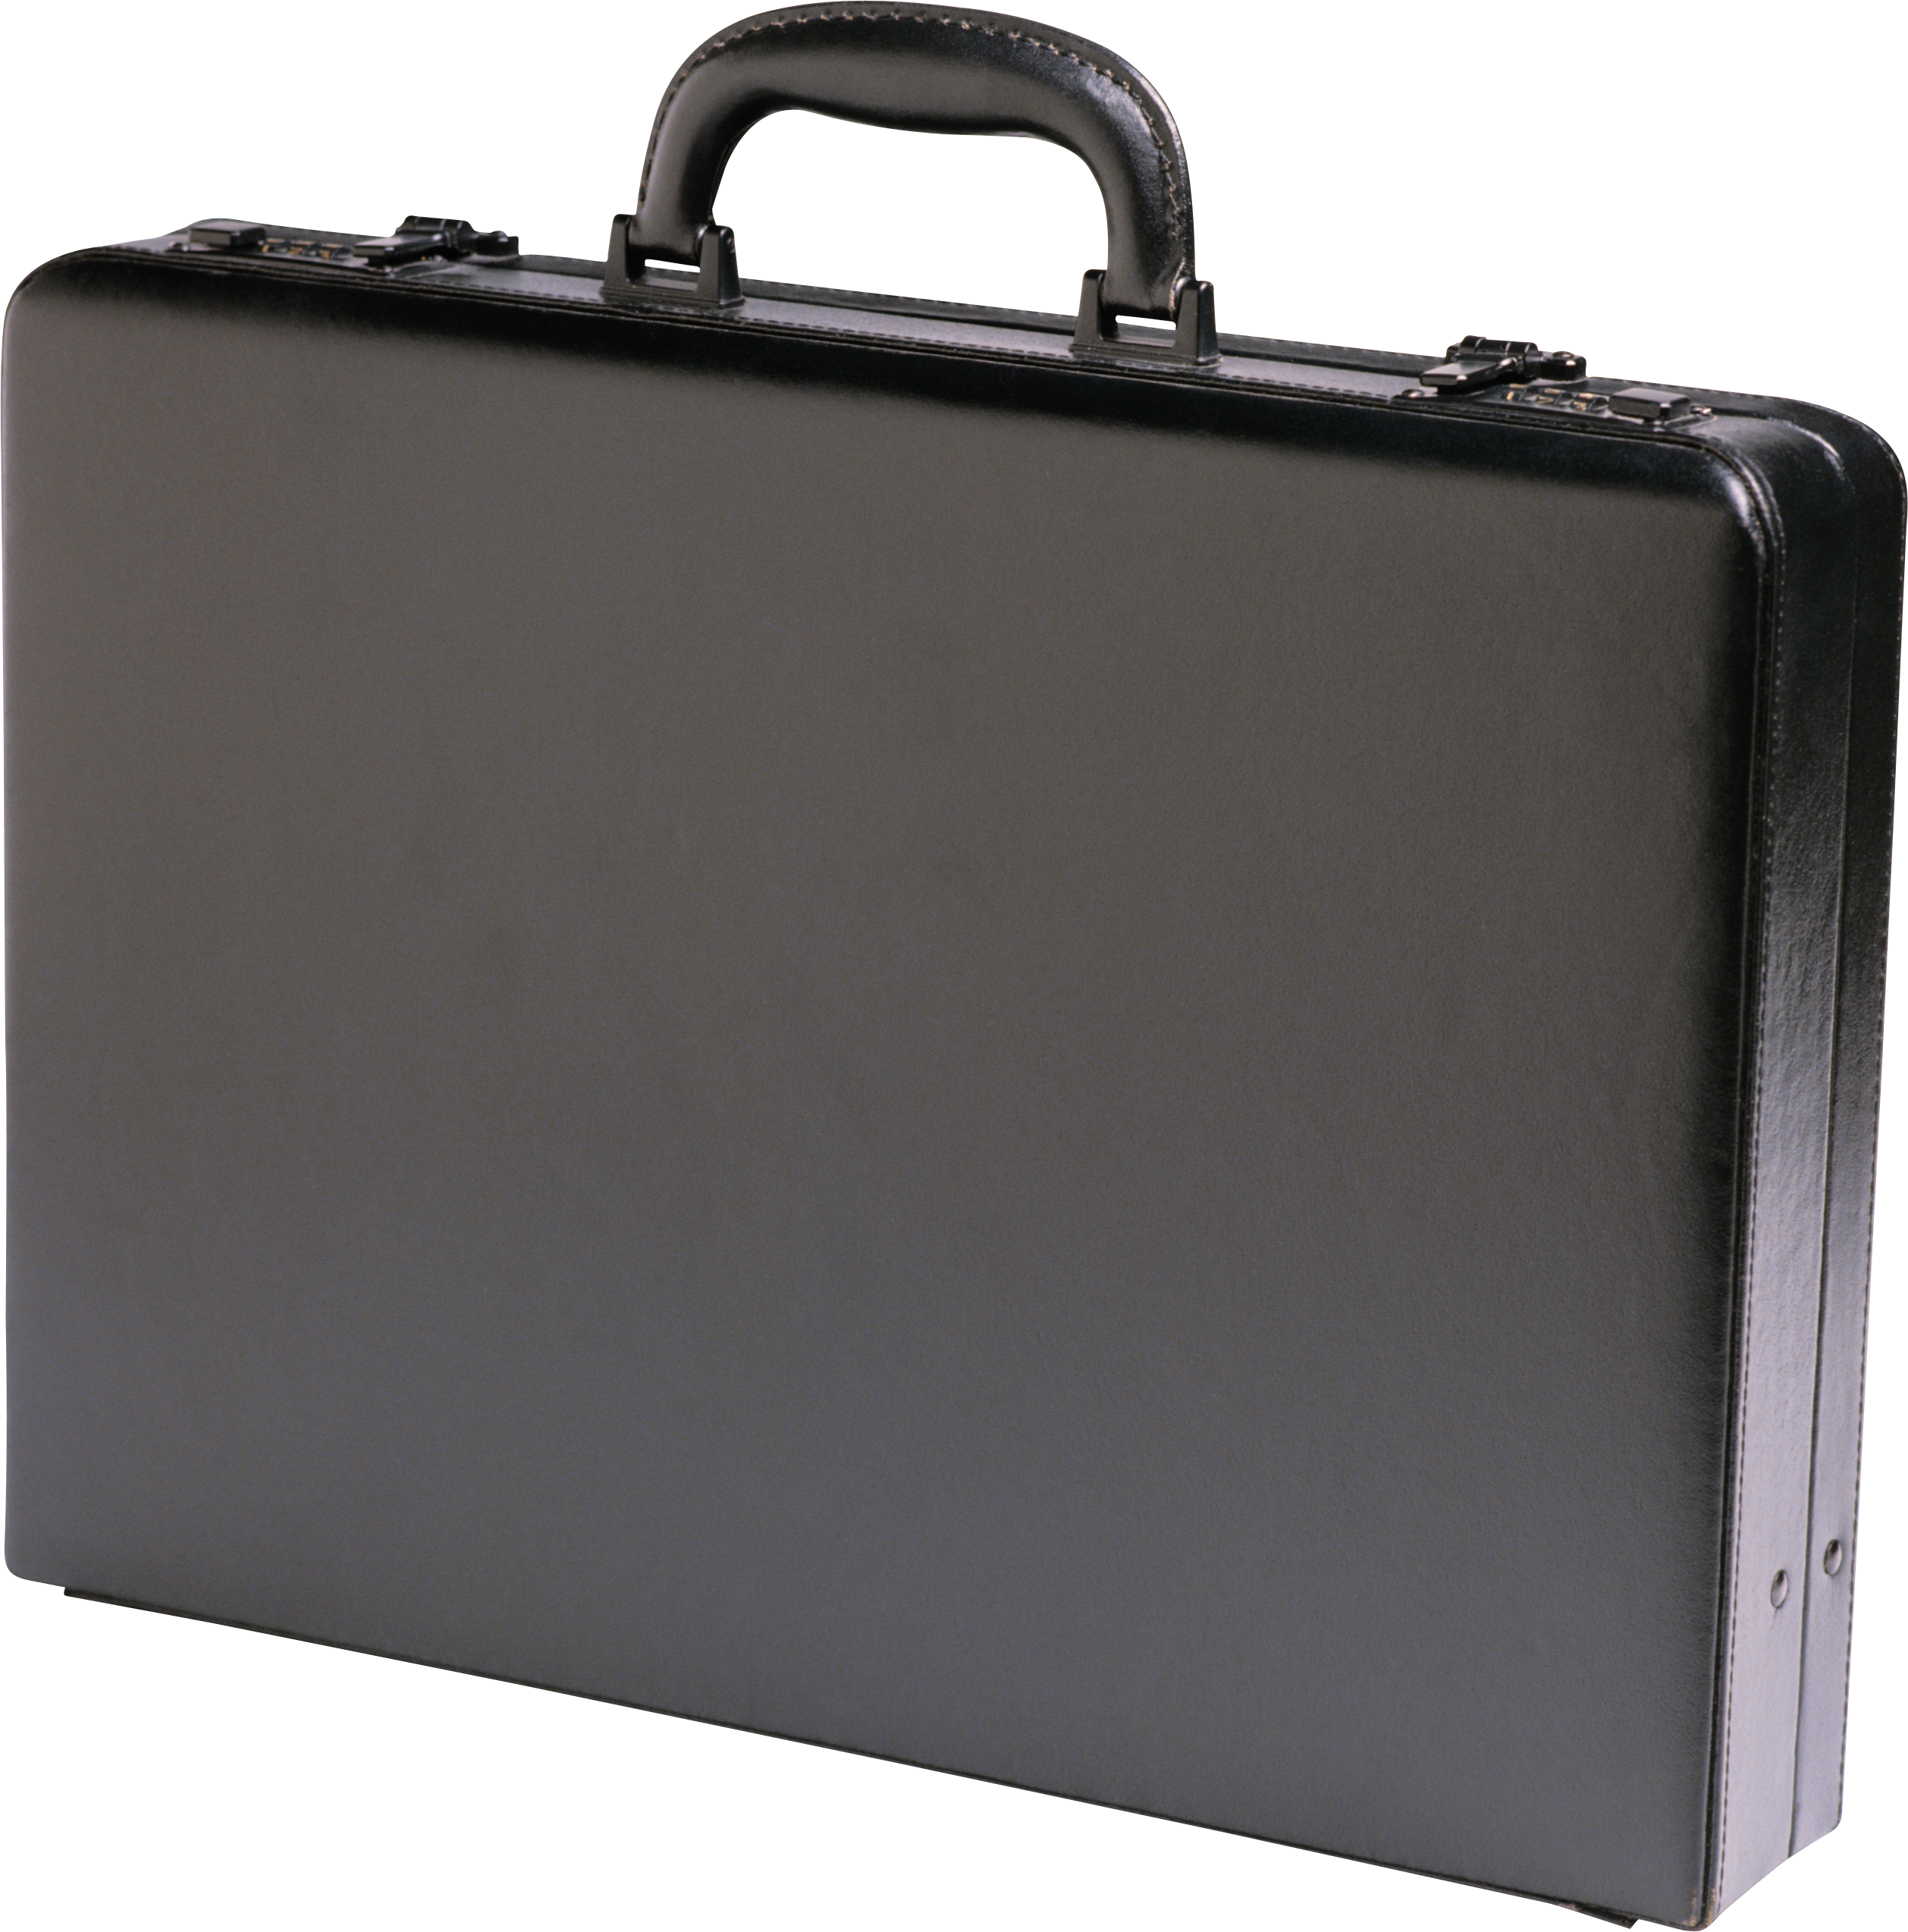 Briefcase Hd Png Hdpng.com 2516 - Briefcase, Transparent background PNG HD thumbnail